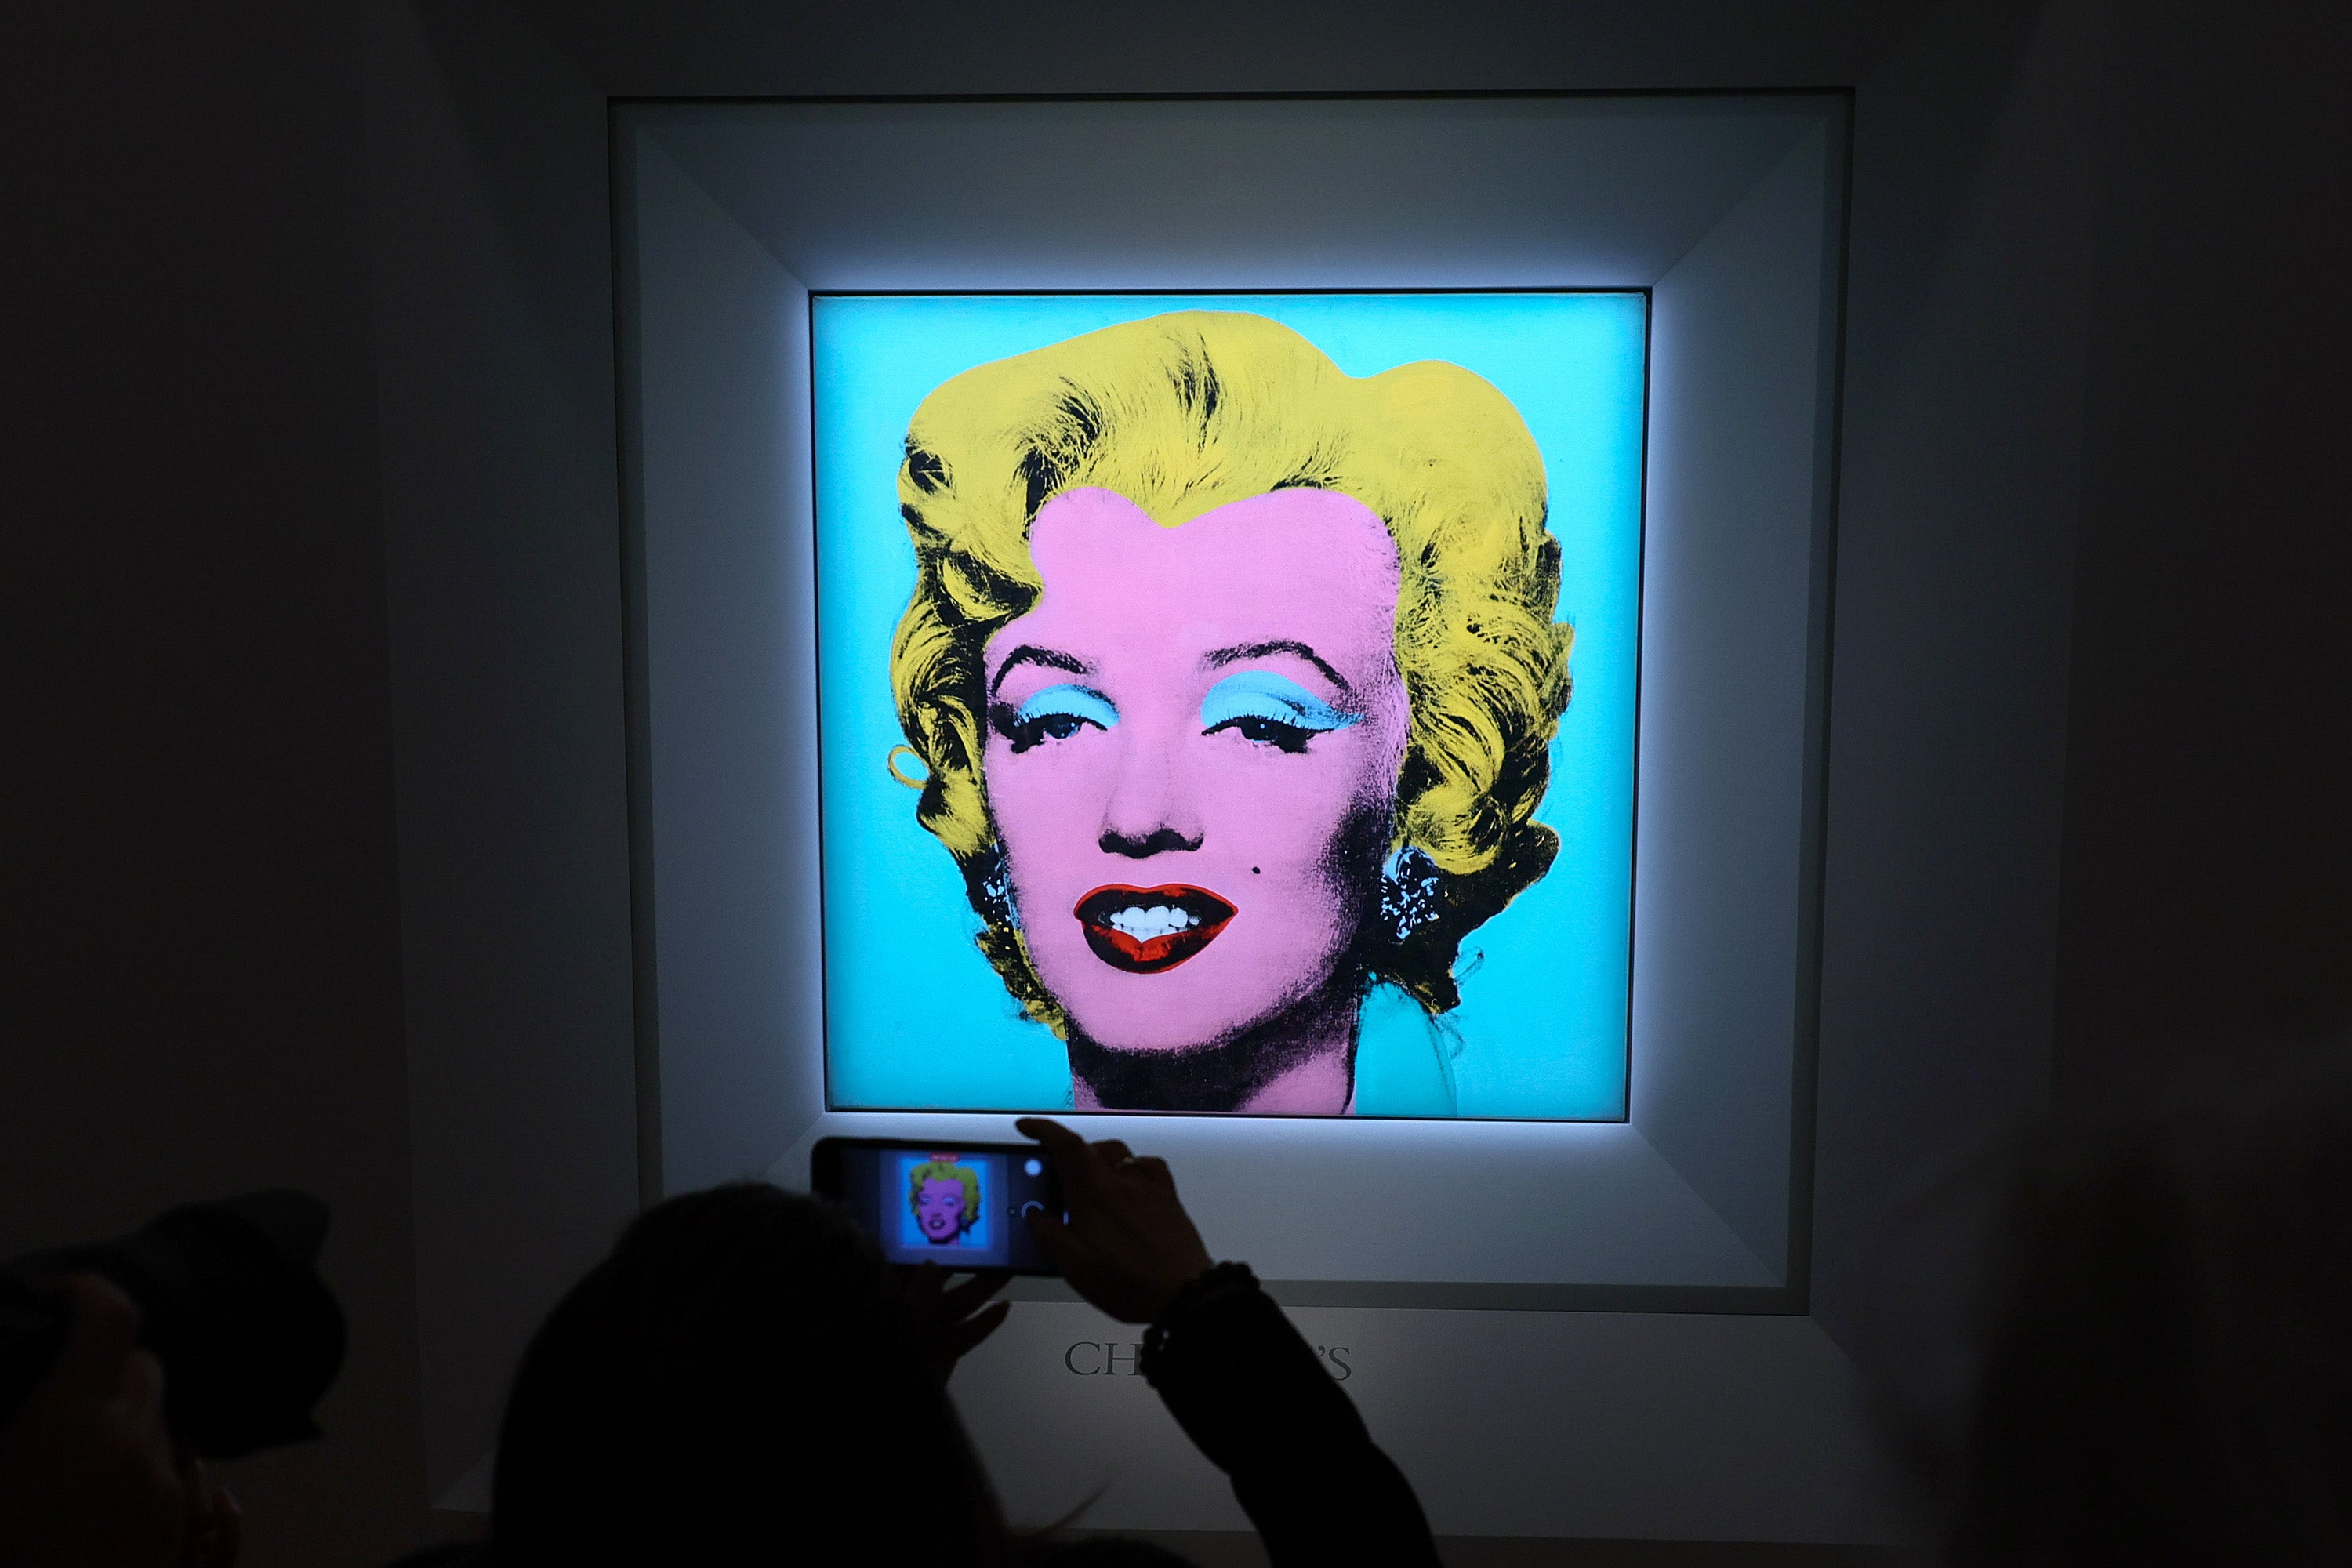 Warhol’s portrait of Monroe is set to become the most expensive 20th-century artwork ever auctioned